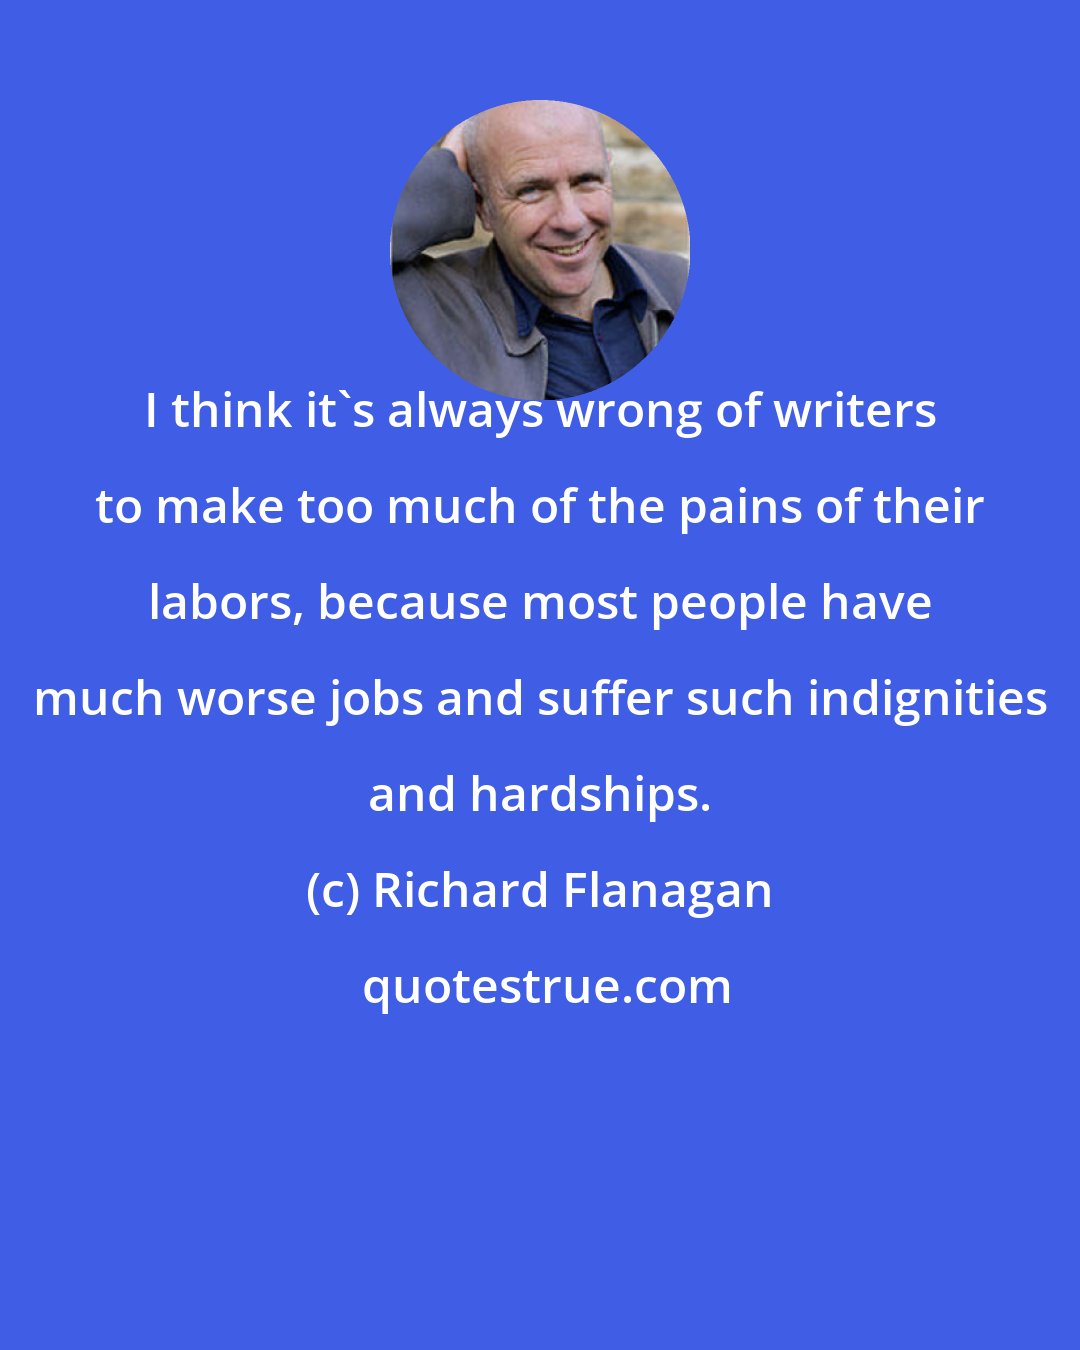 Richard Flanagan: I think it's always wrong of writers to make too much of the pains of their labors, because most people have much worse jobs and suffer such indignities and hardships.